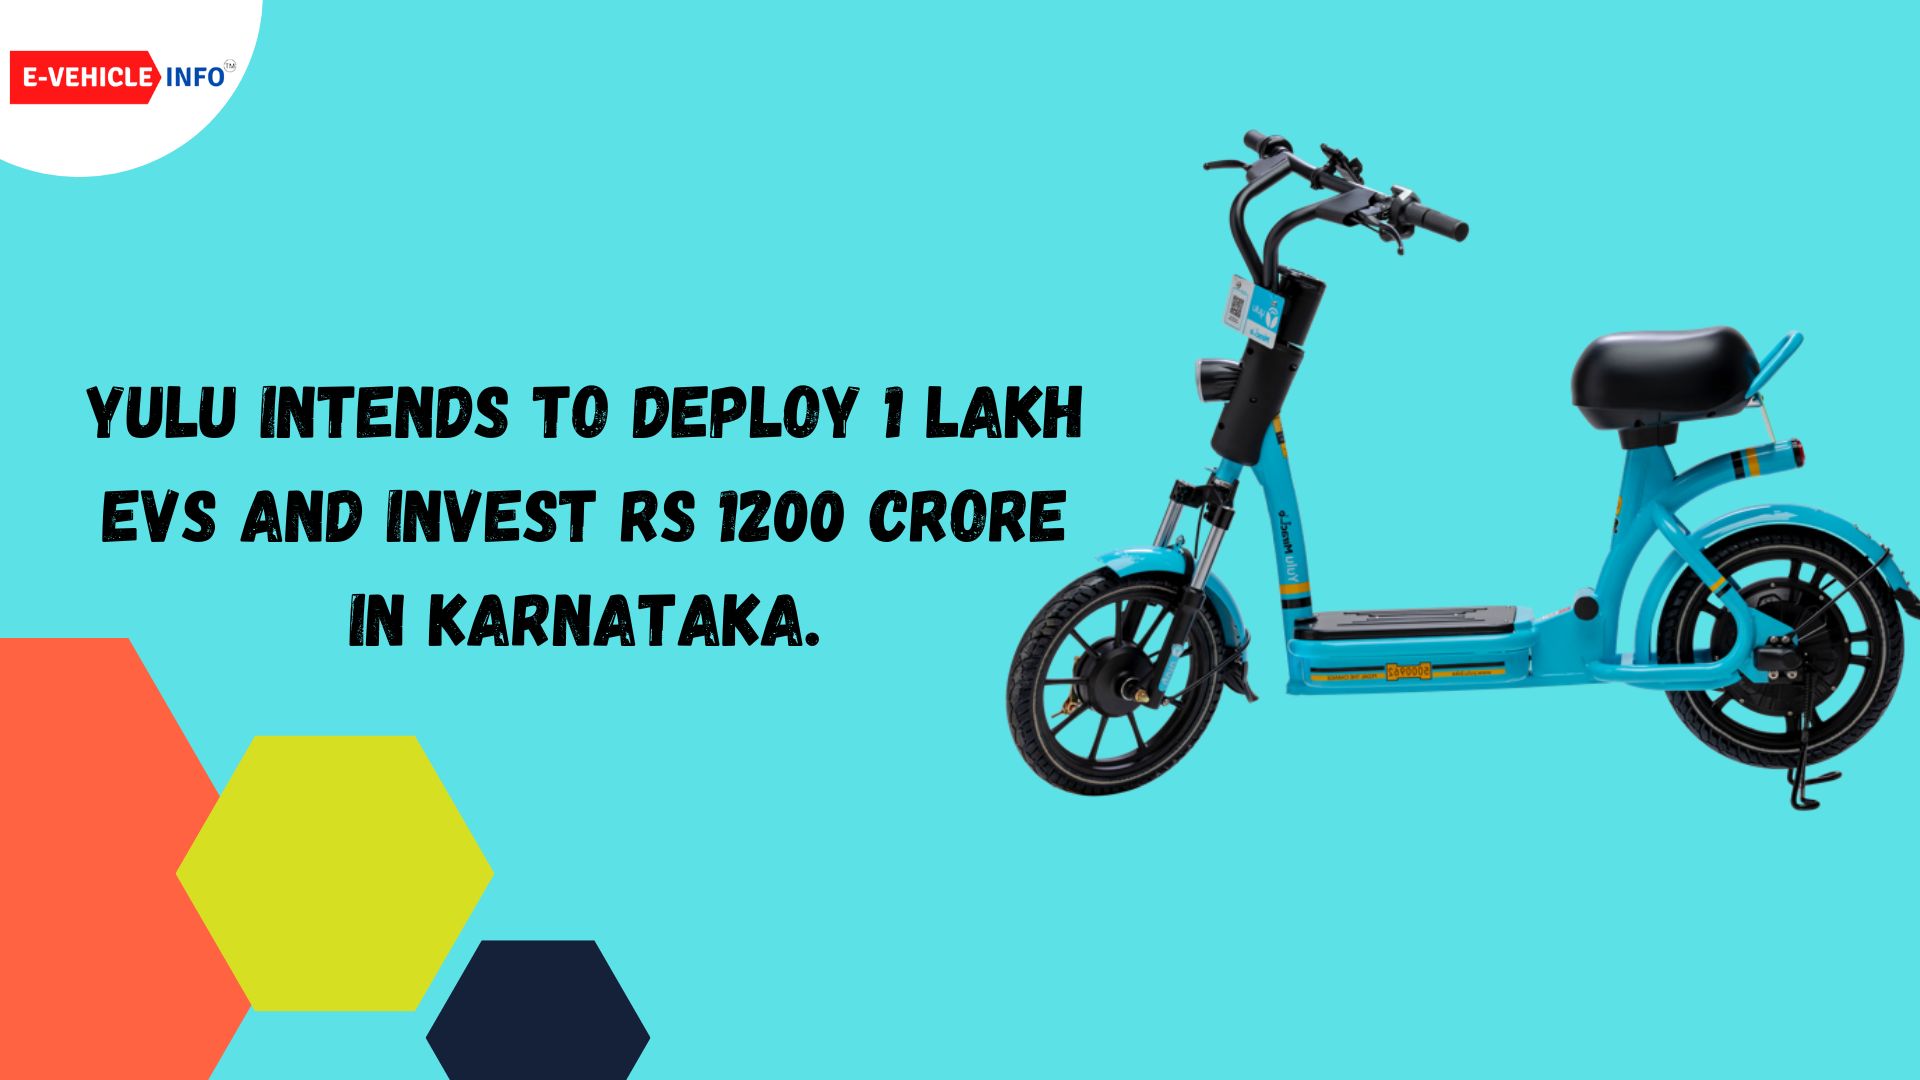 https://e-vehicleinfo.com/yulu-intends-to-deploy-1-lakh-evs-and-invest-rs-1200-crore-in-karnataka/